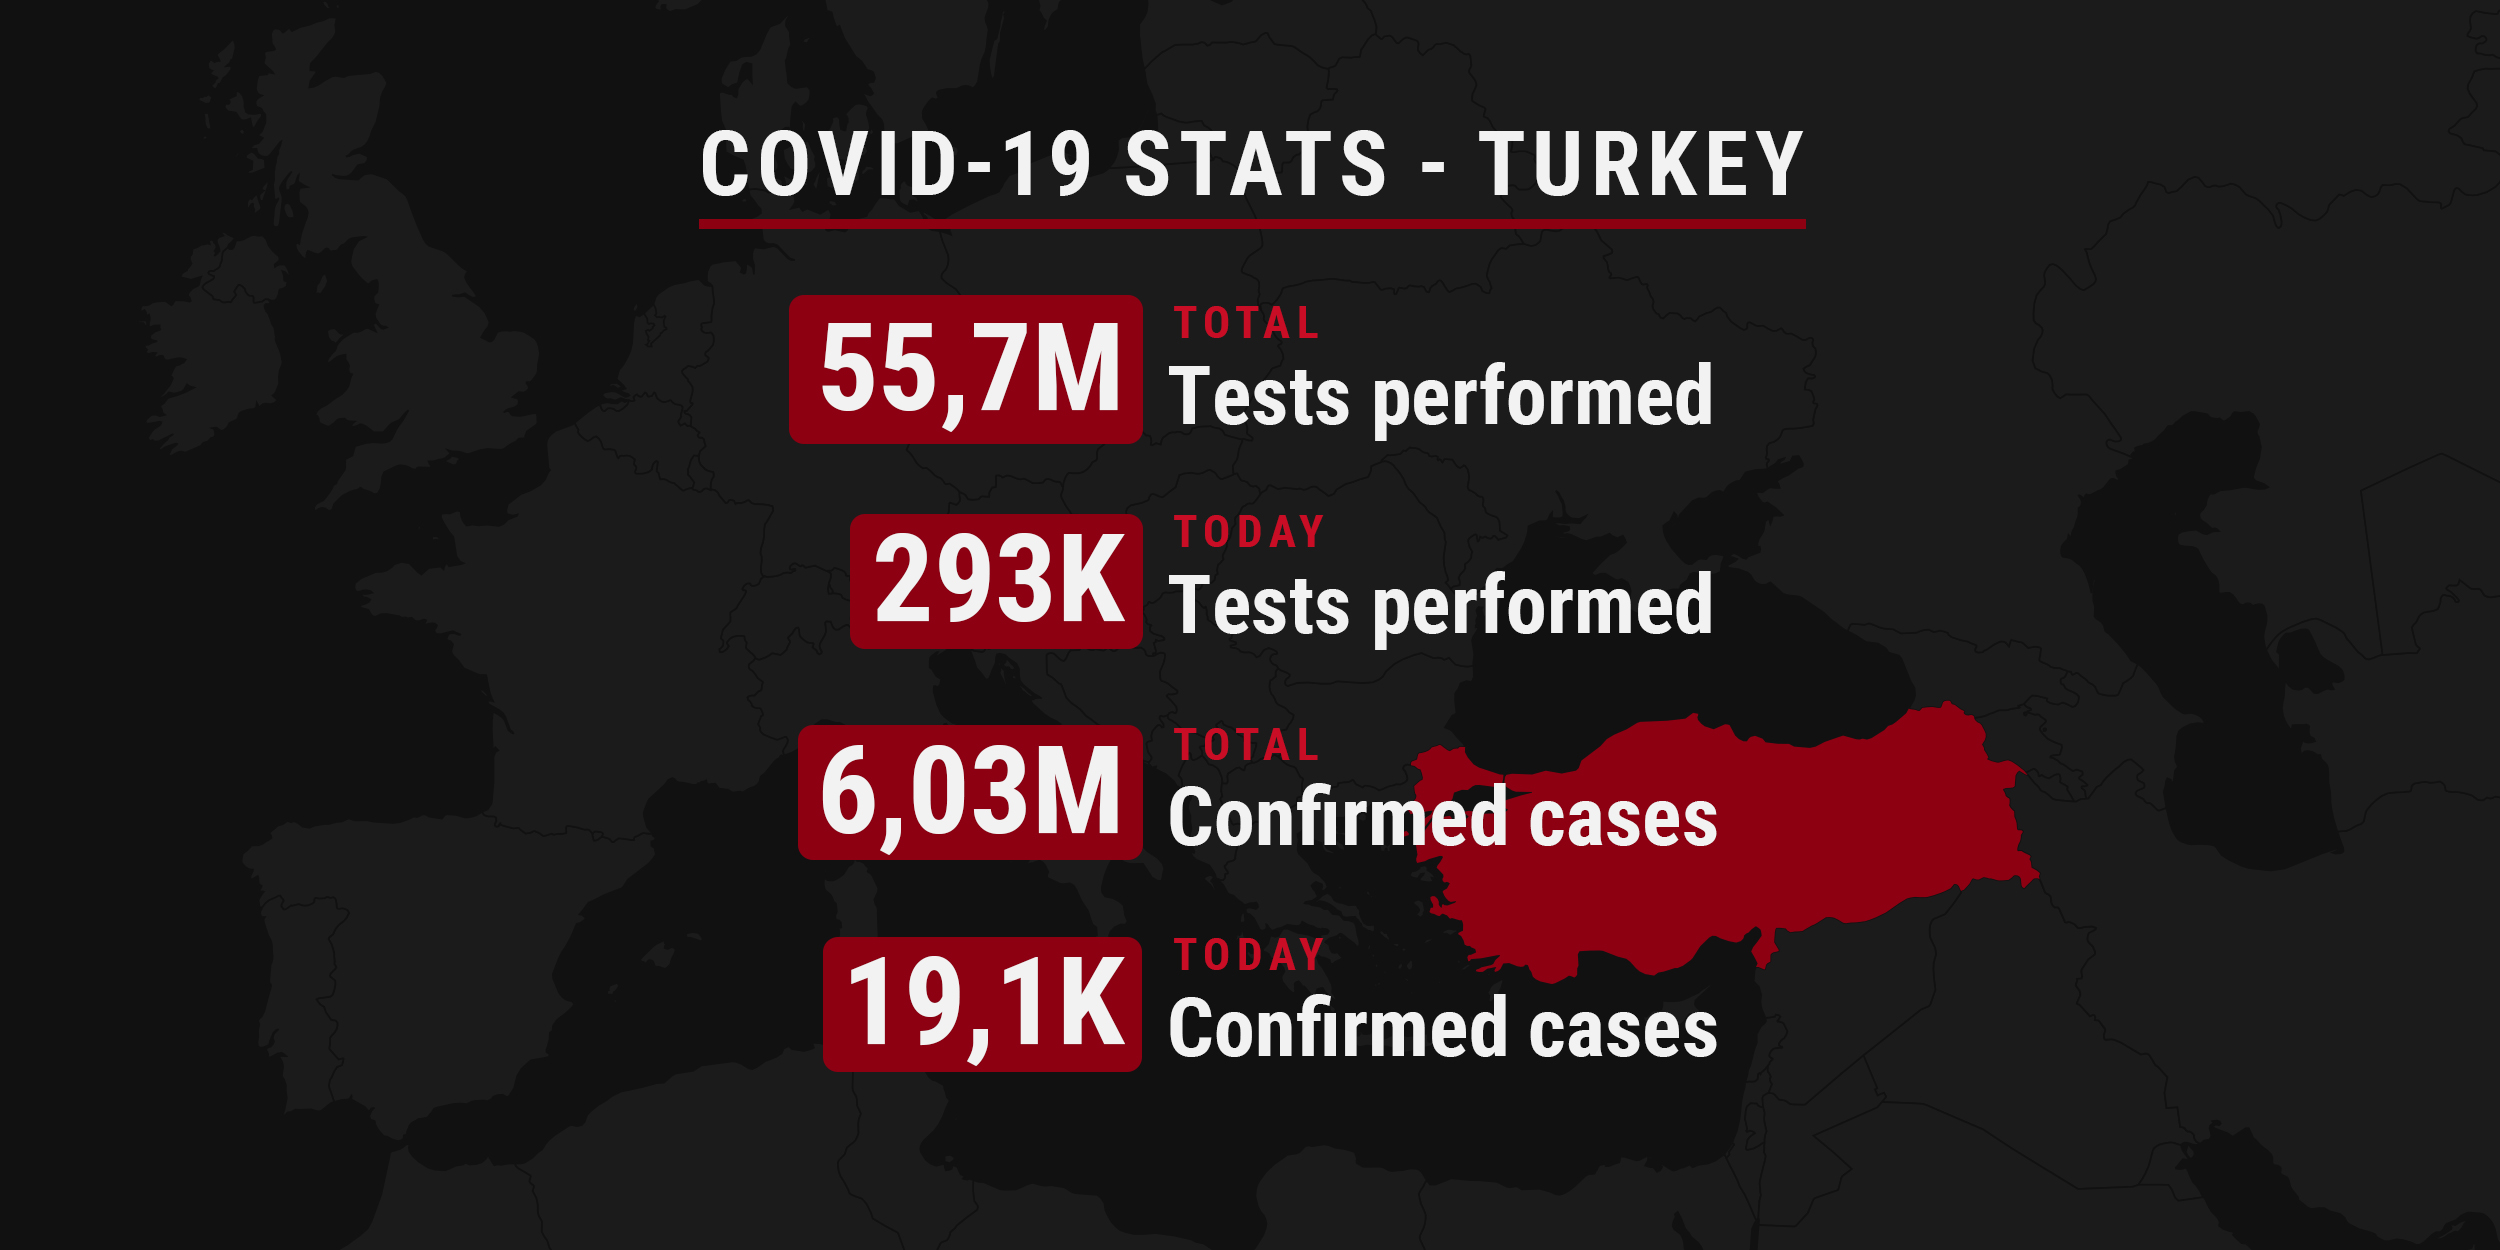 Number of COVID-19 tests and confirmed cases in Turkey